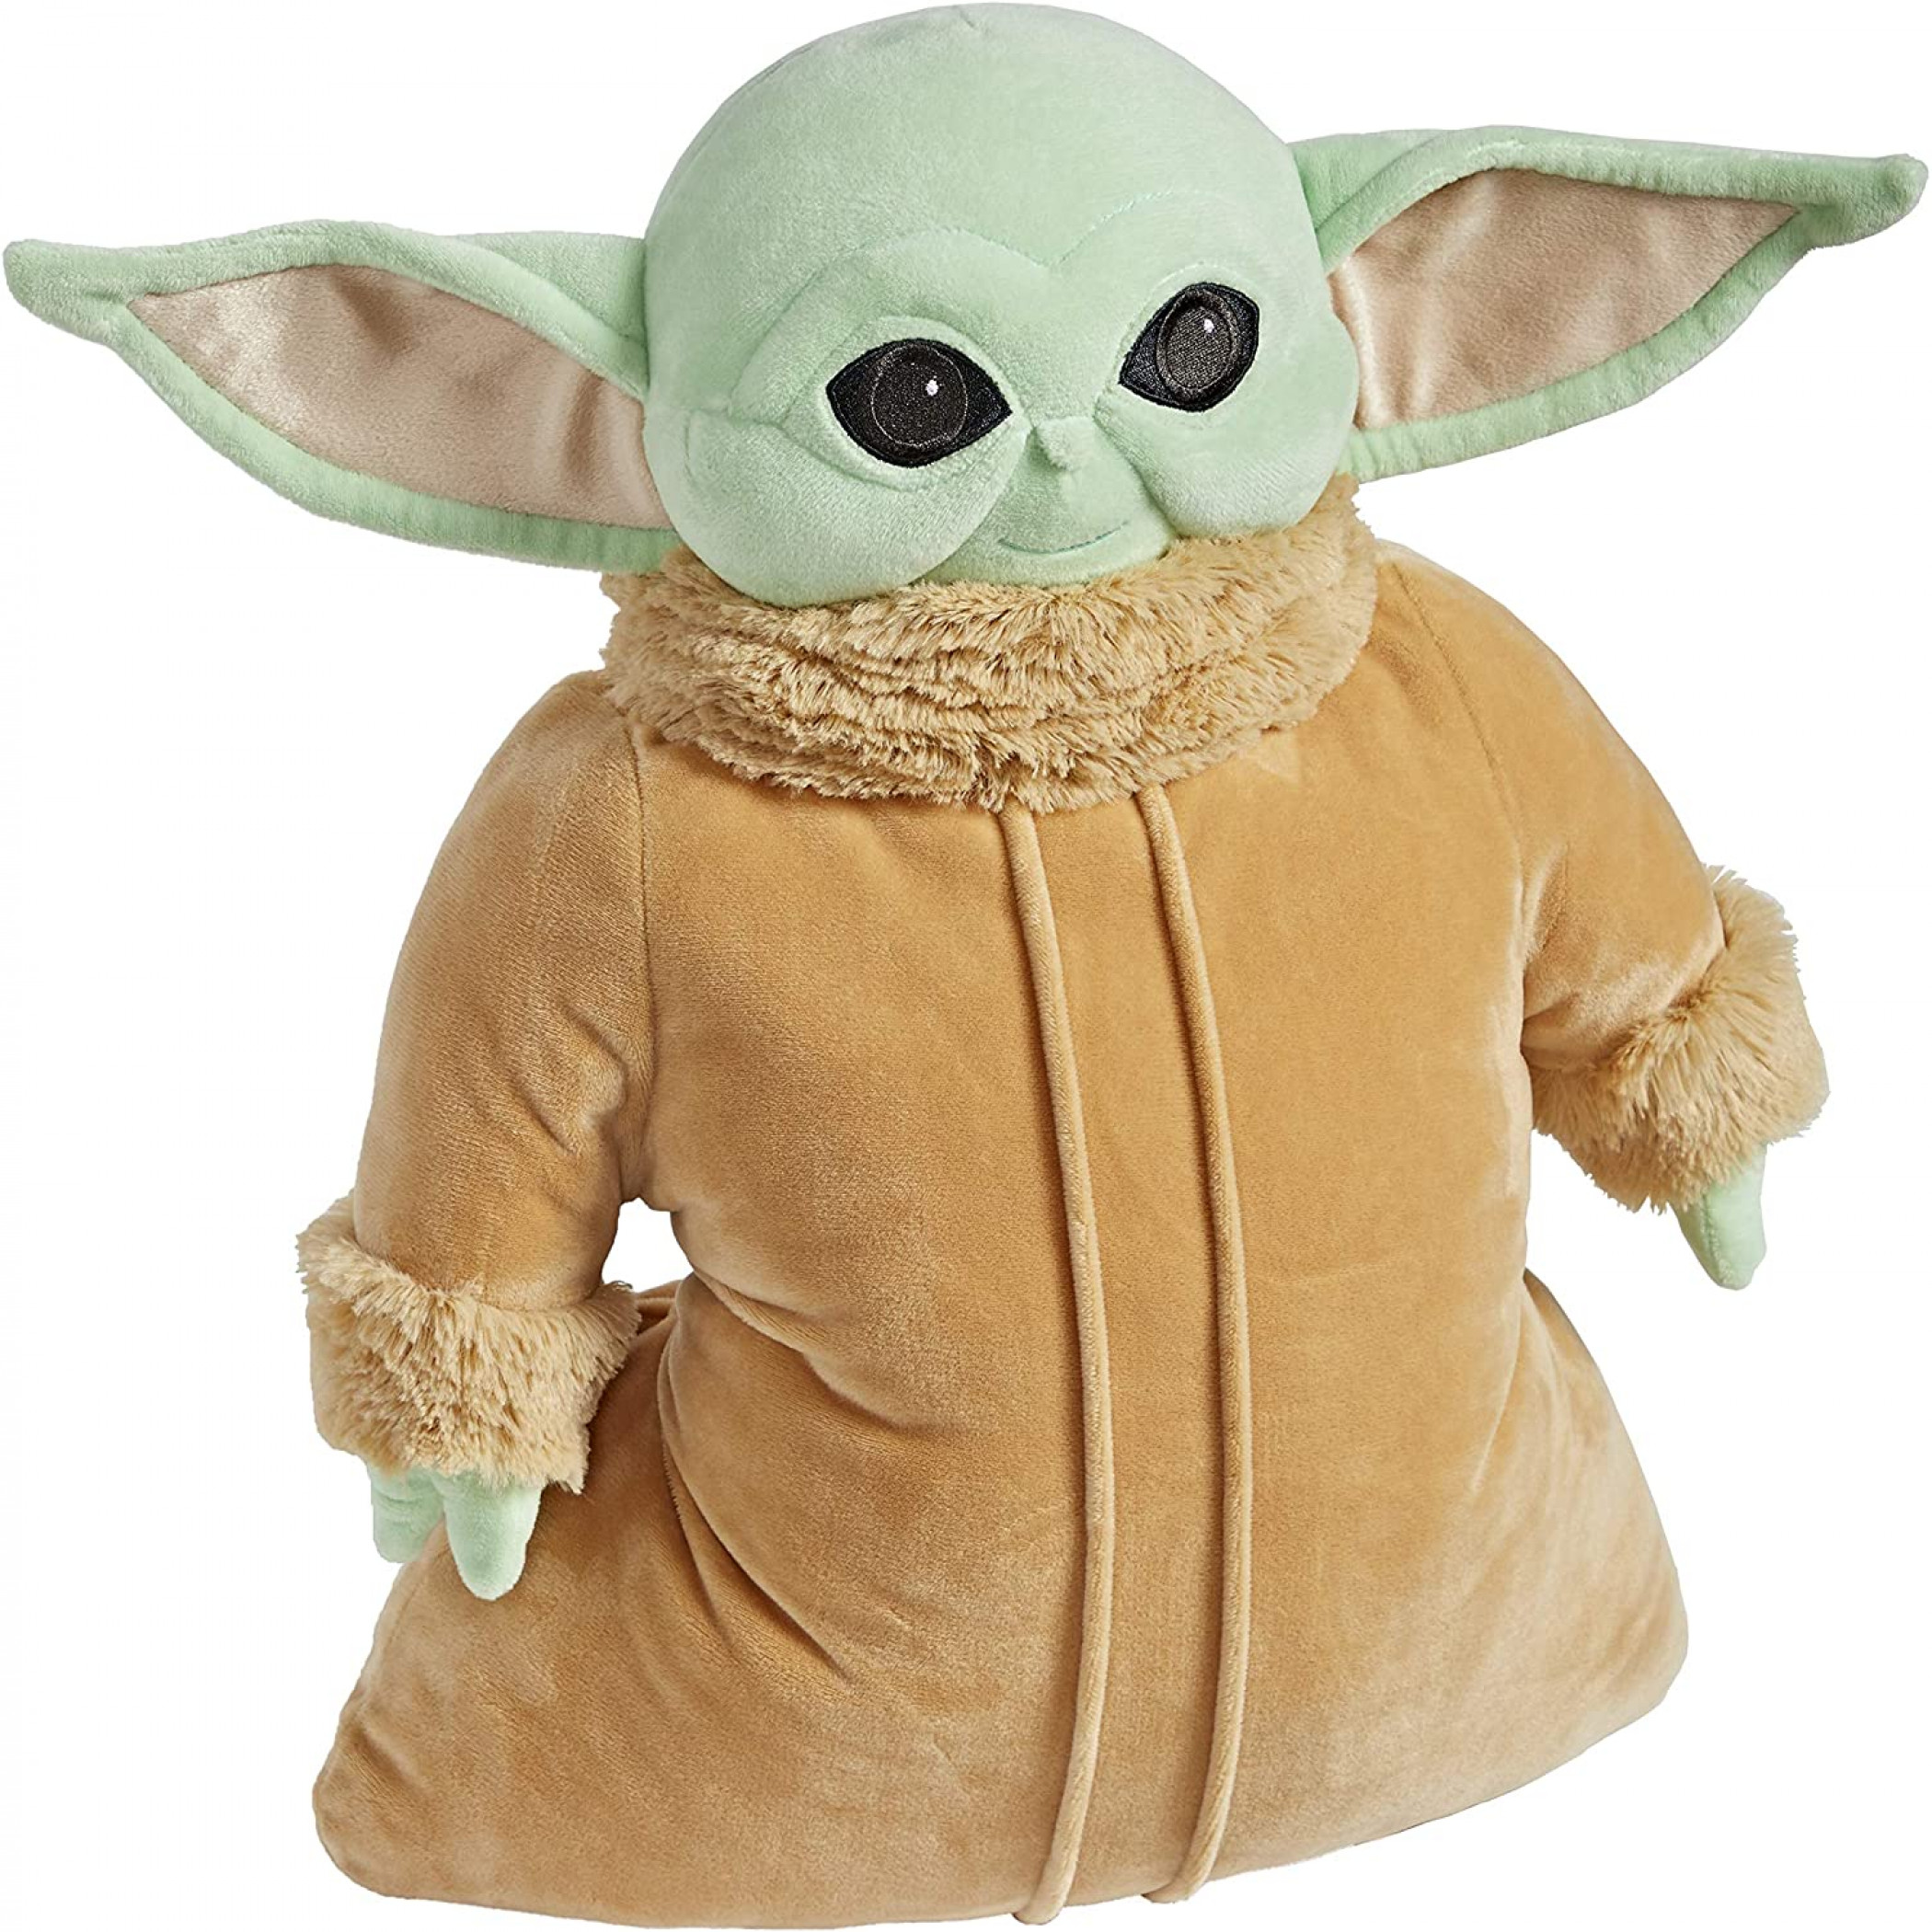 Star Wars The Child from The Mandalorian Pillow Pet